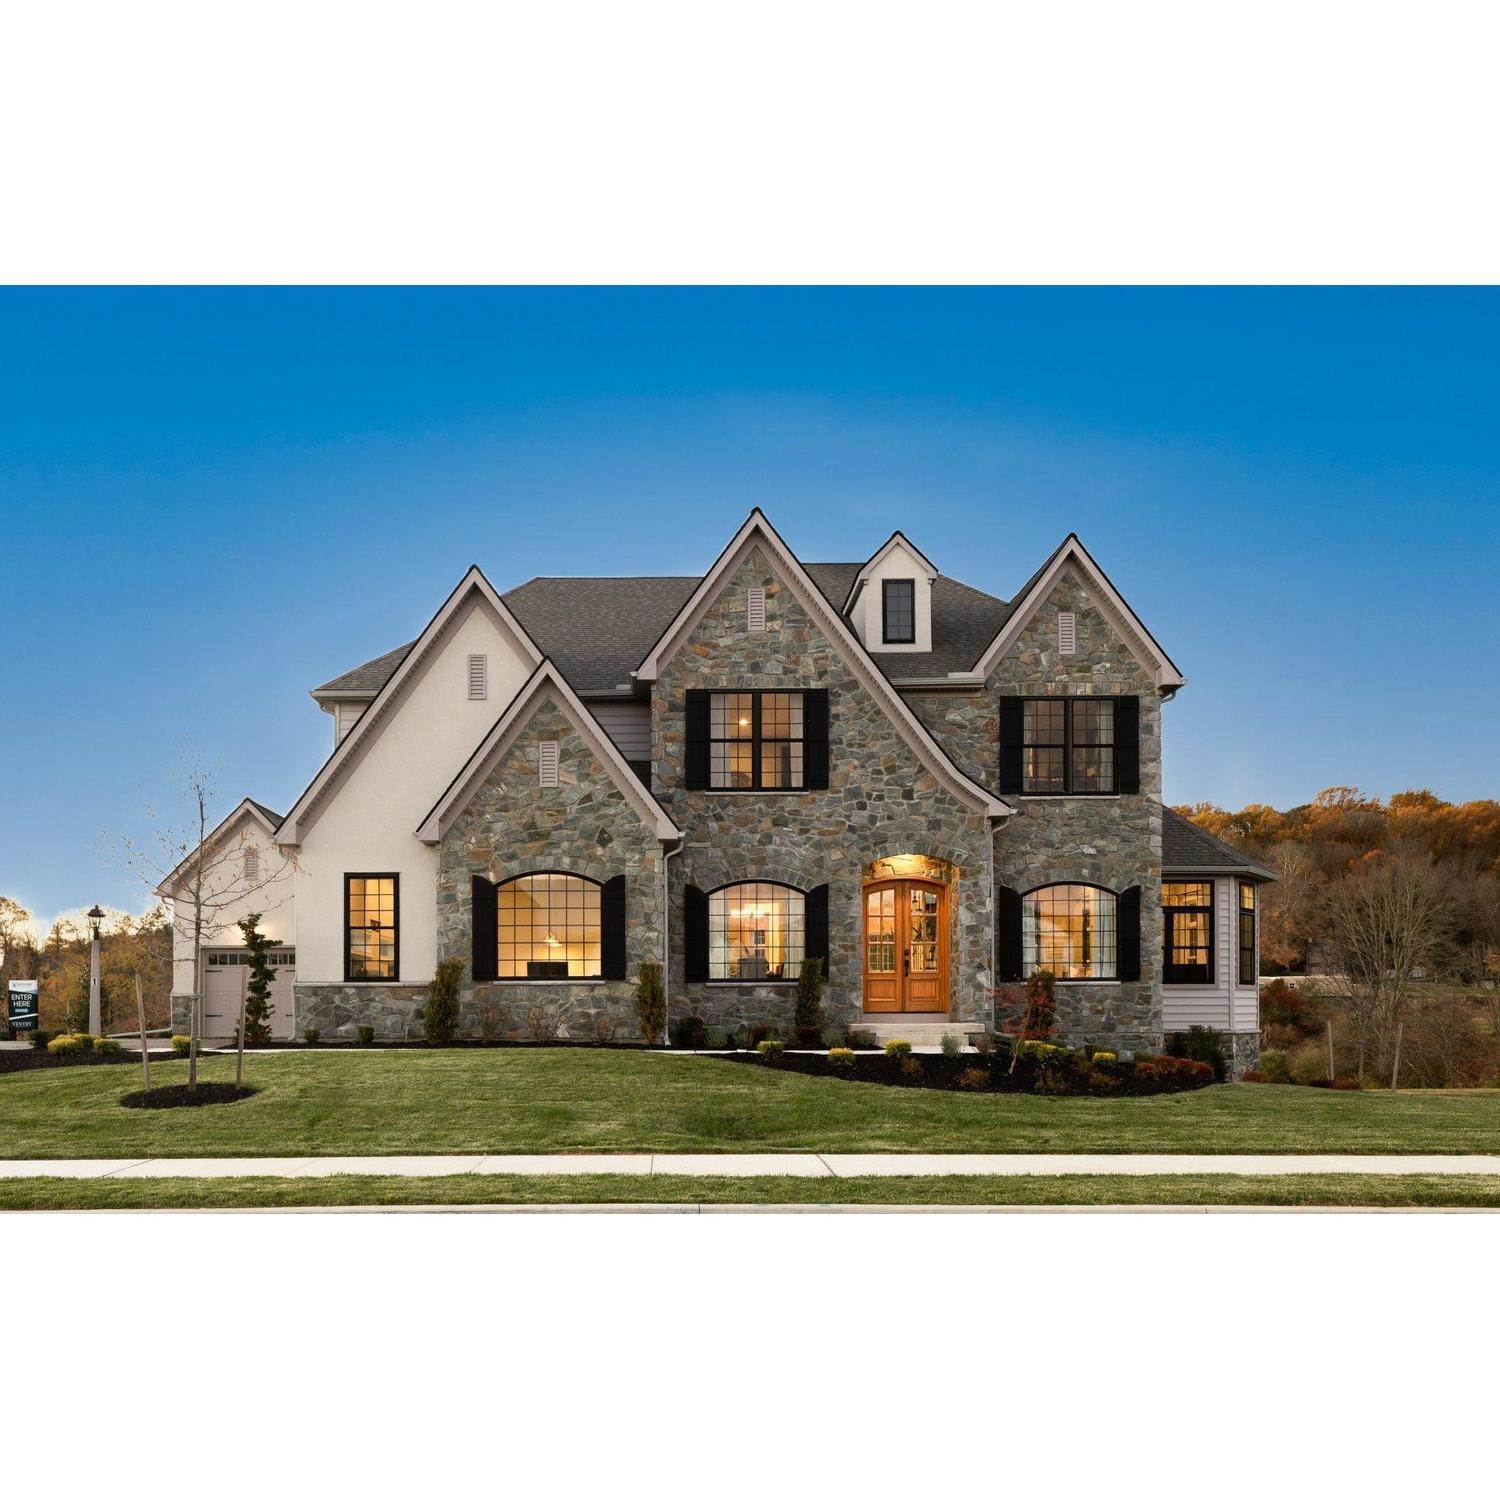 46. 101 Parkview Way, Newtown Square, PA 19073에 Ventry at Edgmont Preserve 건물